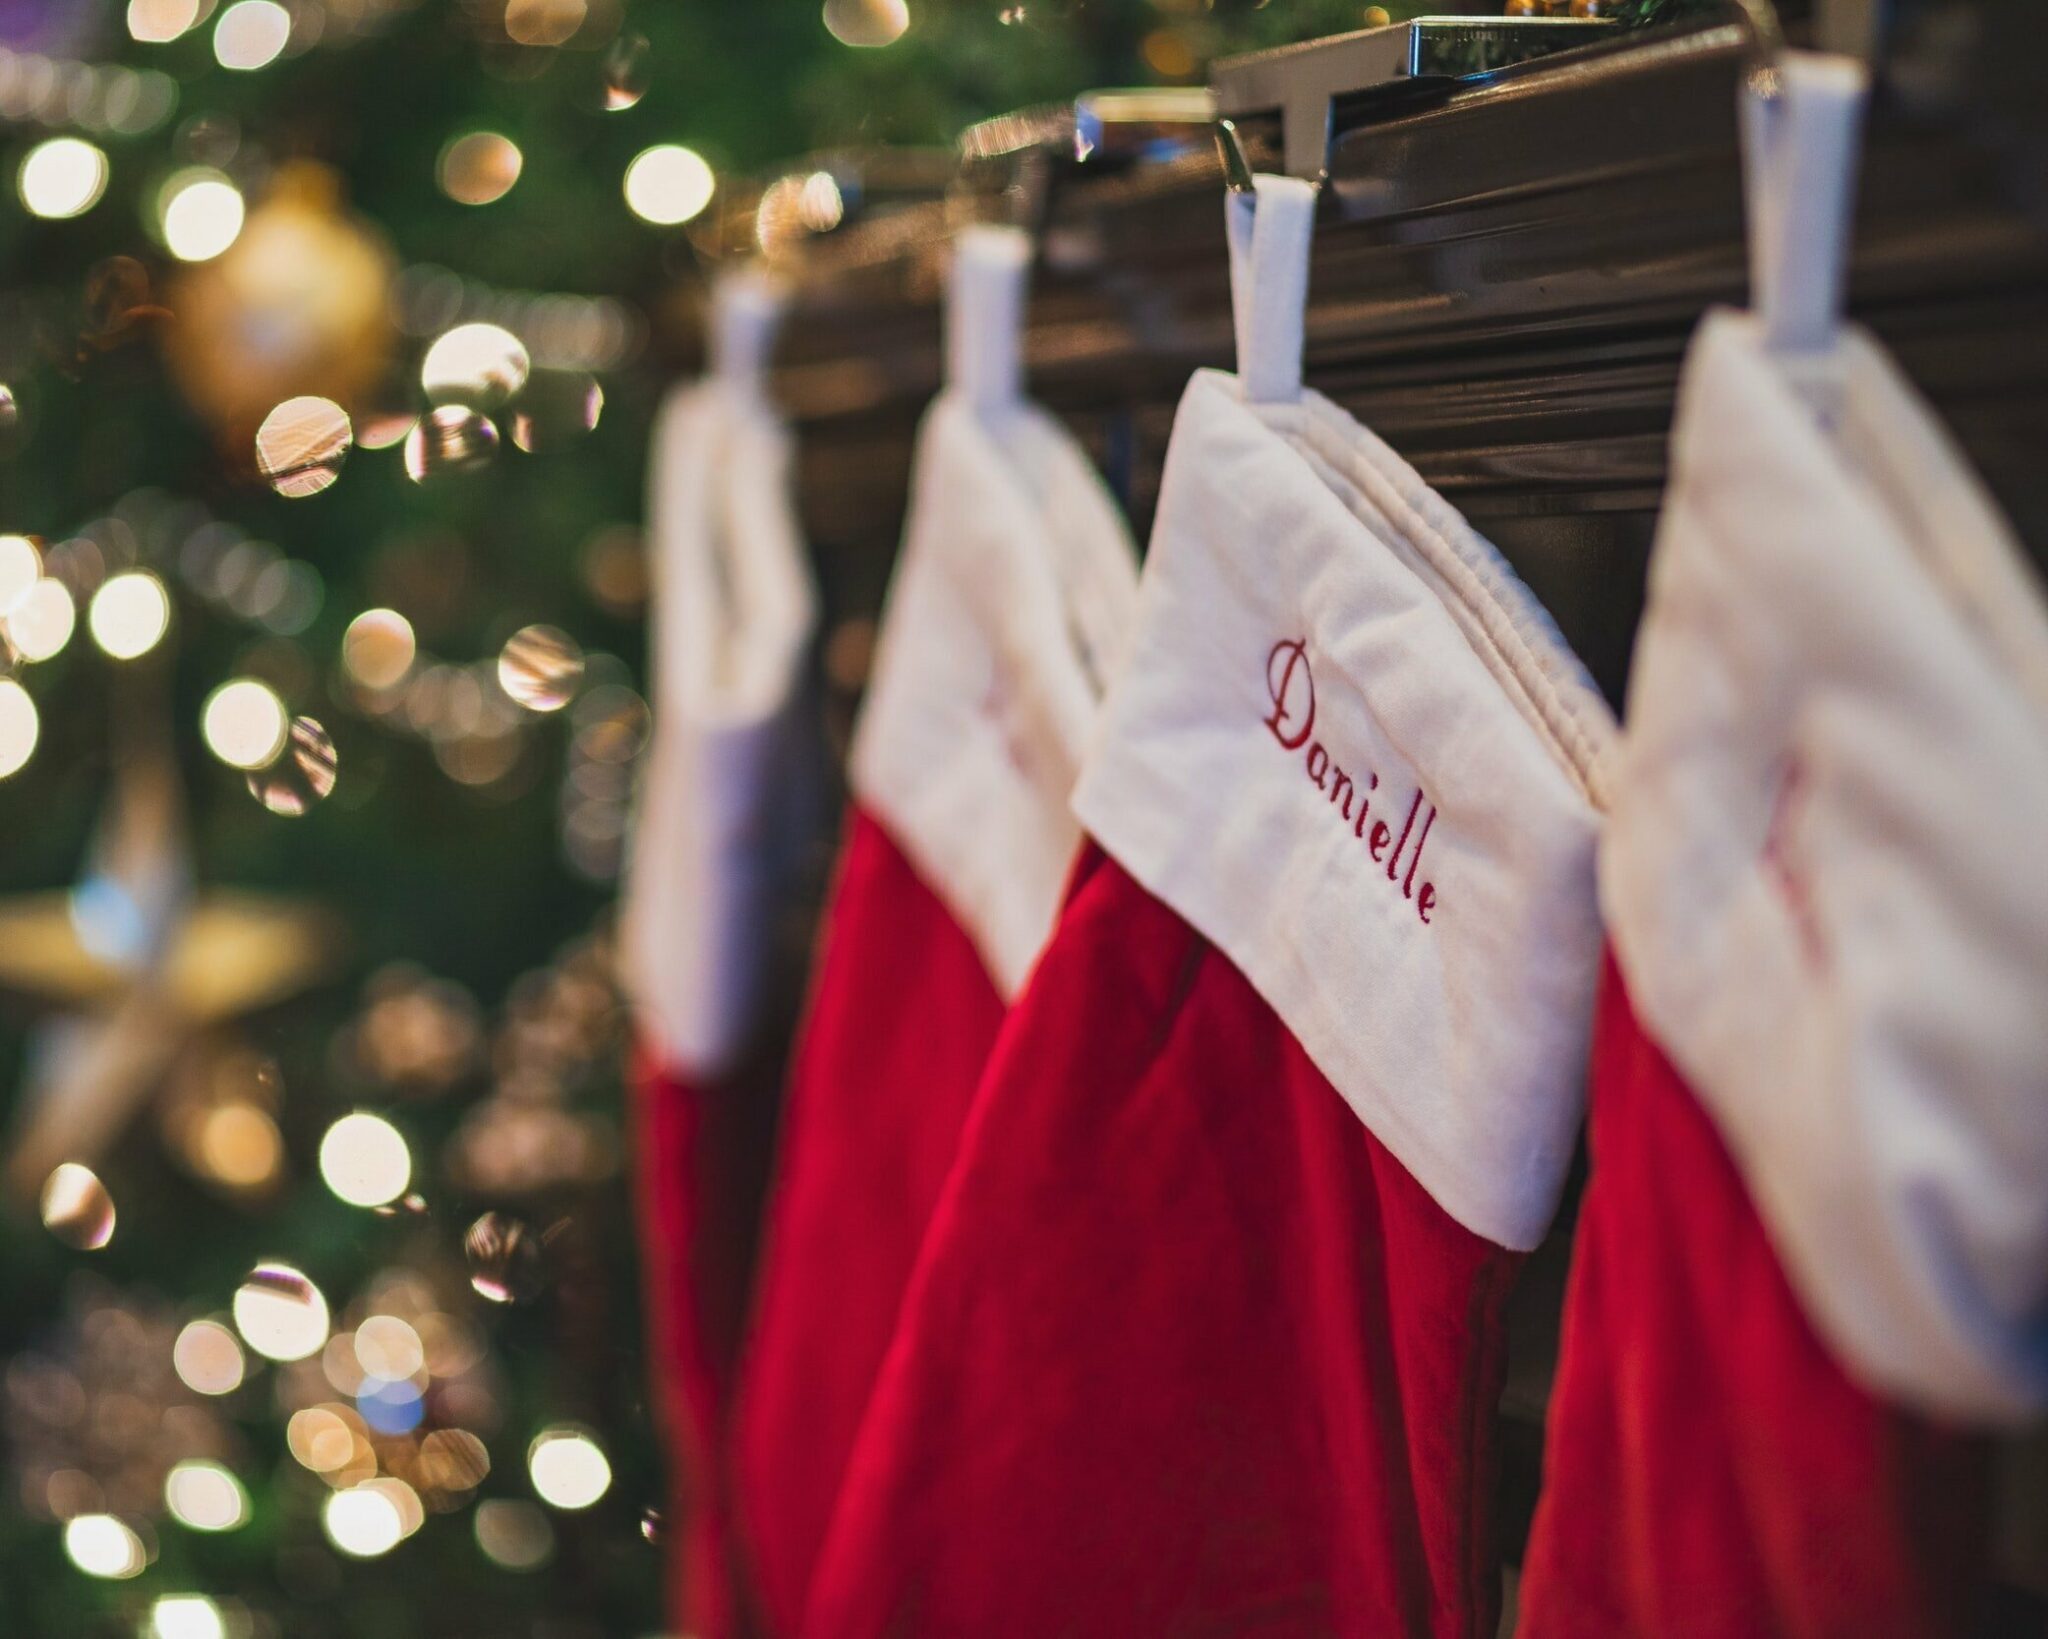 where did the tradition of hanging stockings at christmas come from and what does it symbolize